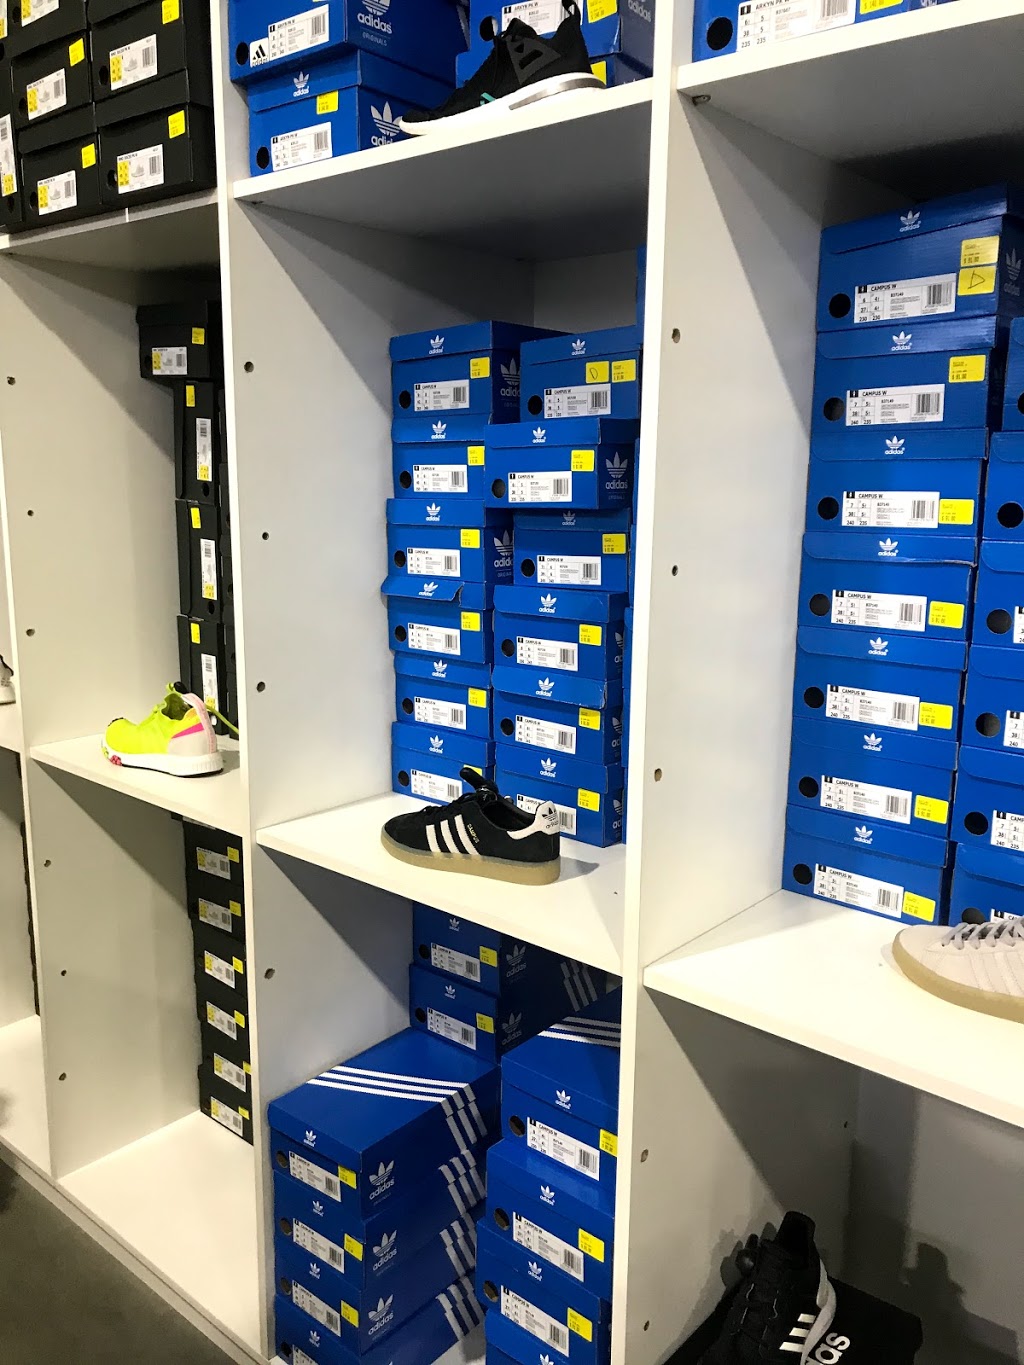 adidas outlet canberra